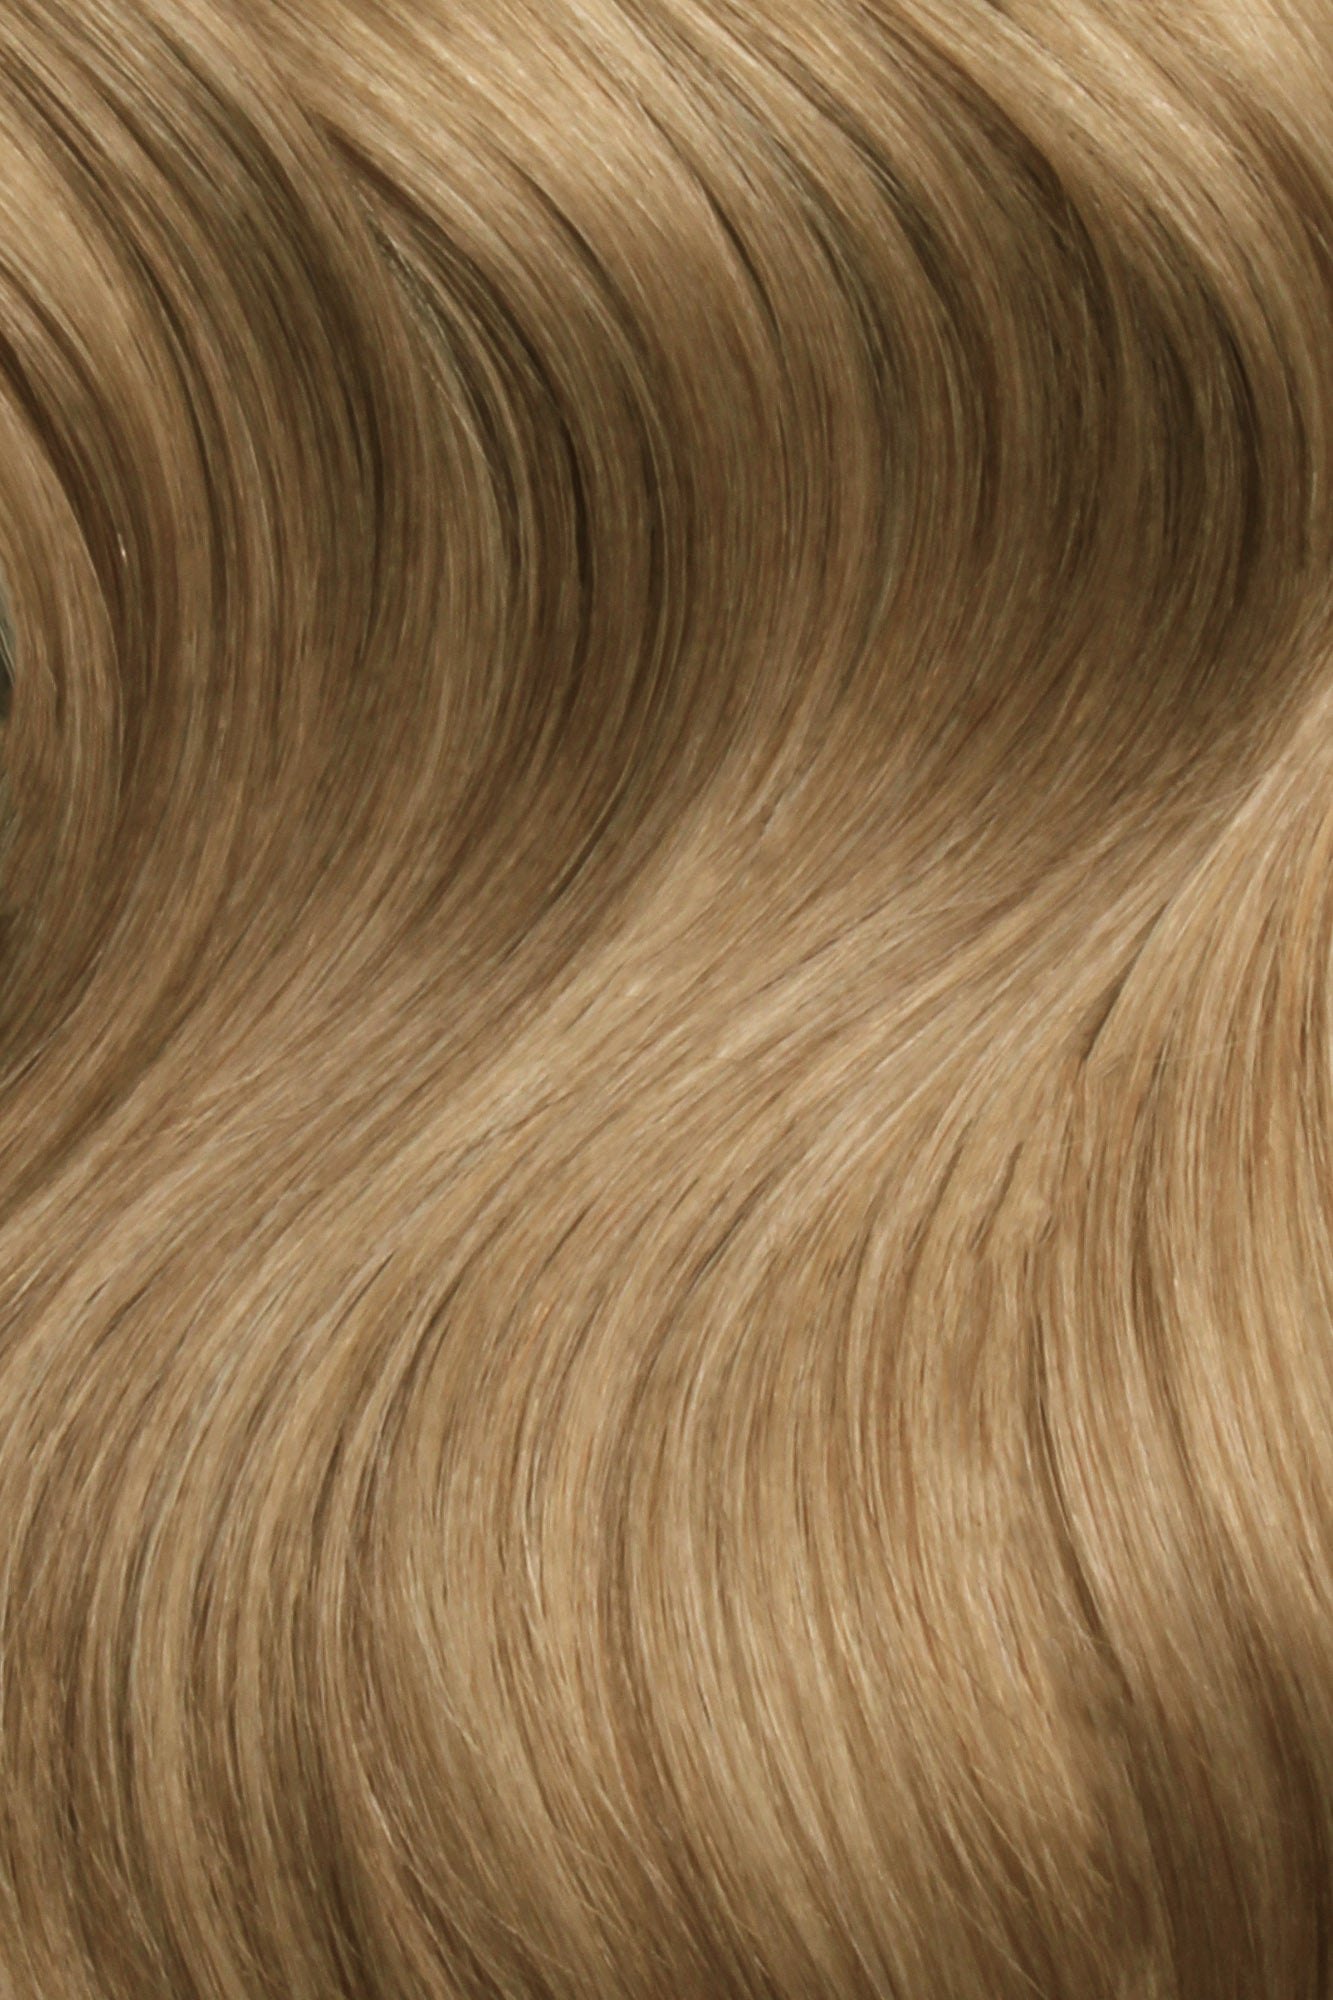 Tiny Tip Bonds 22&quot; - SWAY Hair Extensions Champagne-Chestnut: Lightweight, discreet. Made with Italian Keratin for comfort and long-lasting wear. Reusable and compatible with other SWAY Salon Professional Methods